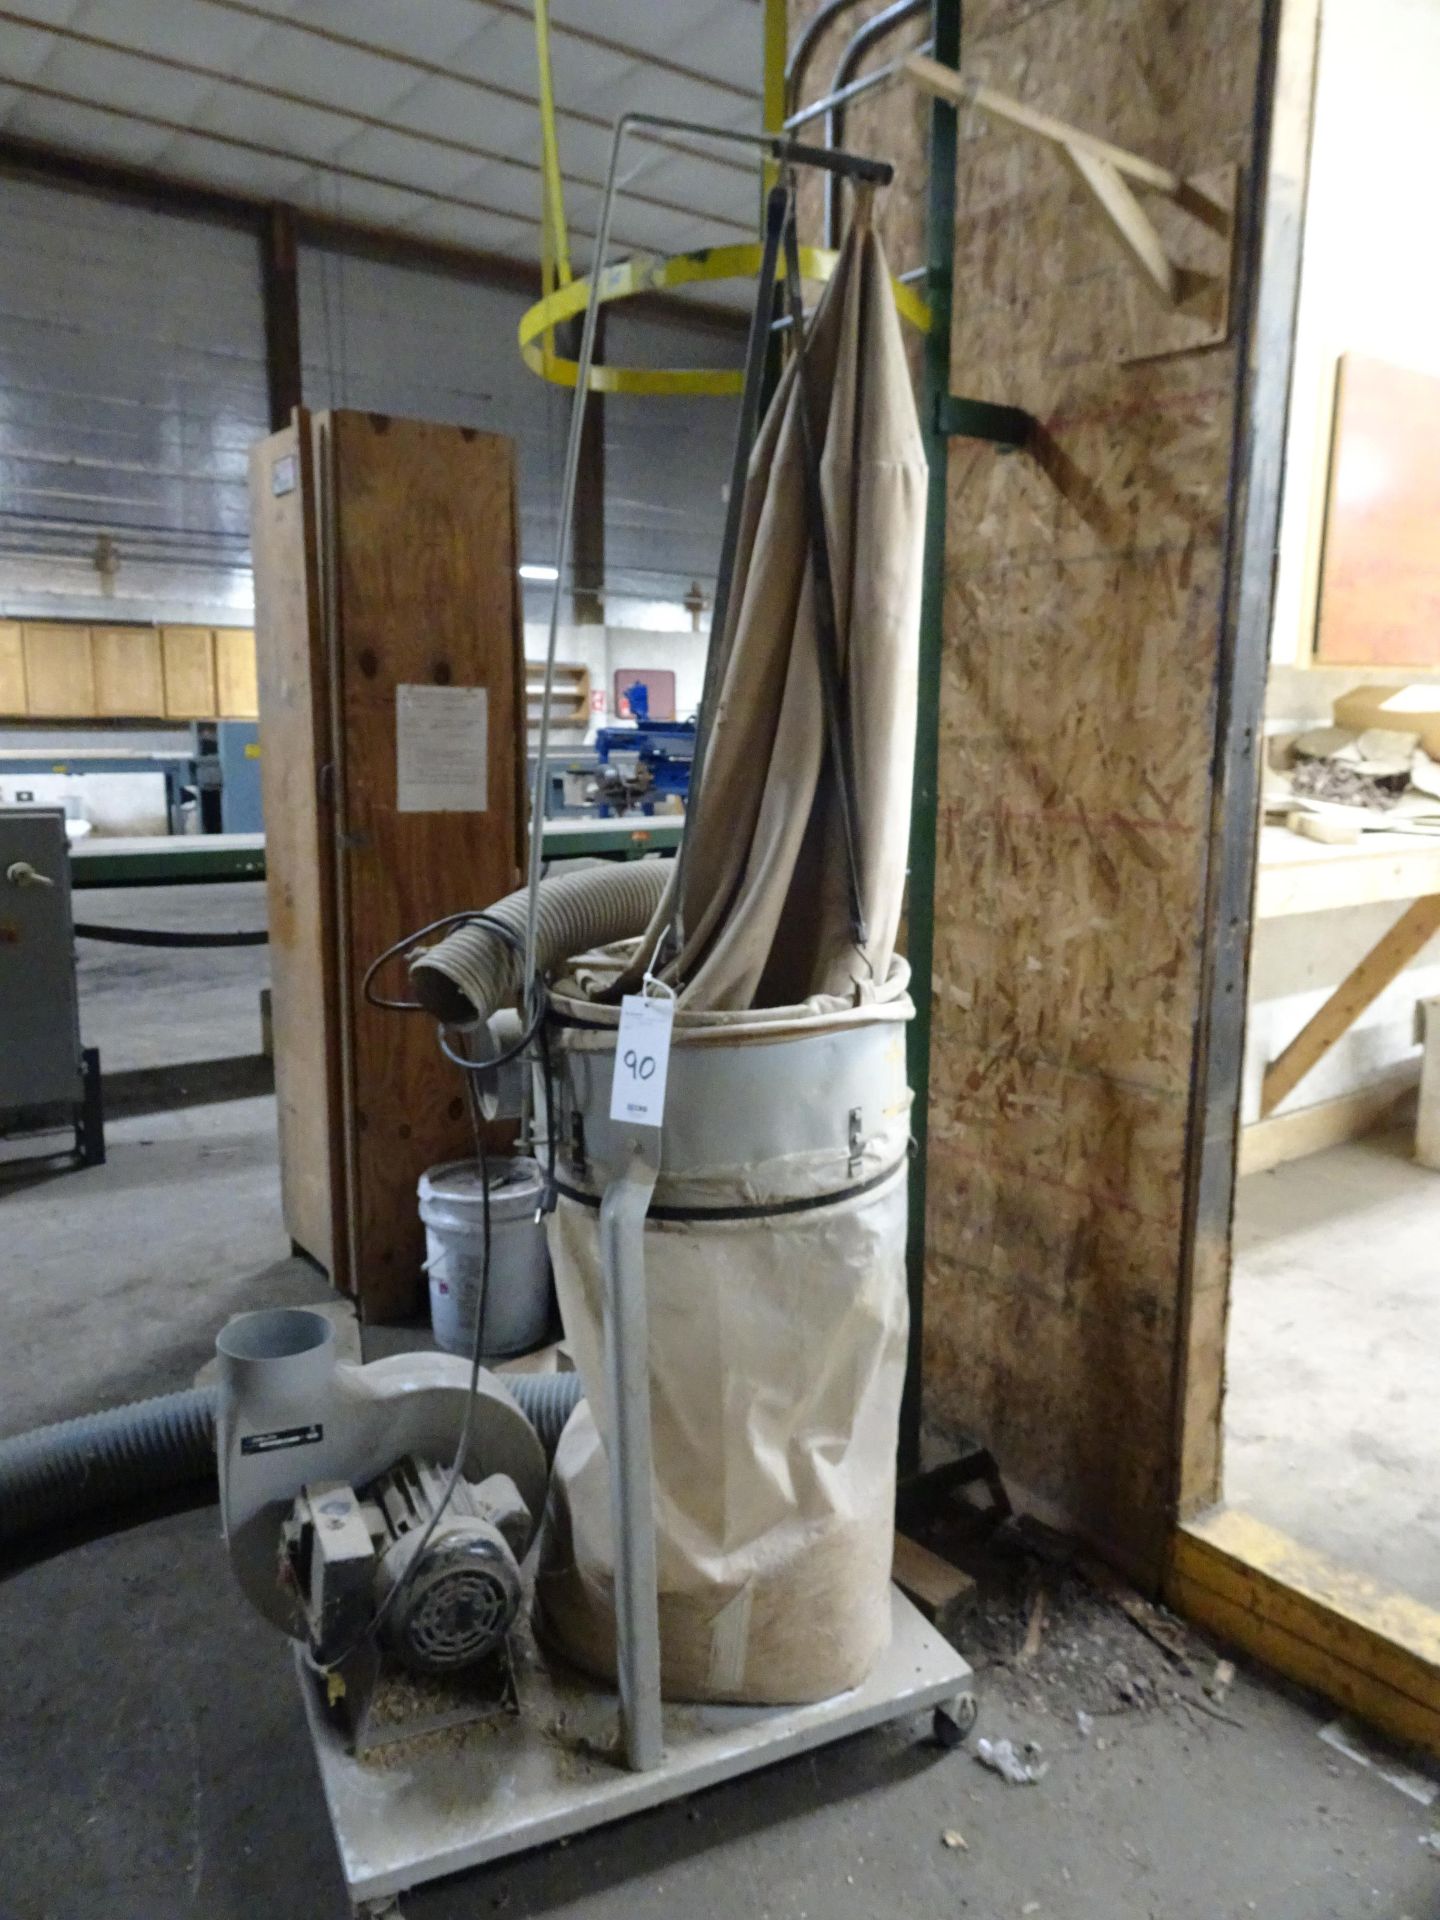 Delta Model 50-850 Portable Dust Collector, S/N 036177SF40, Location: FW Room